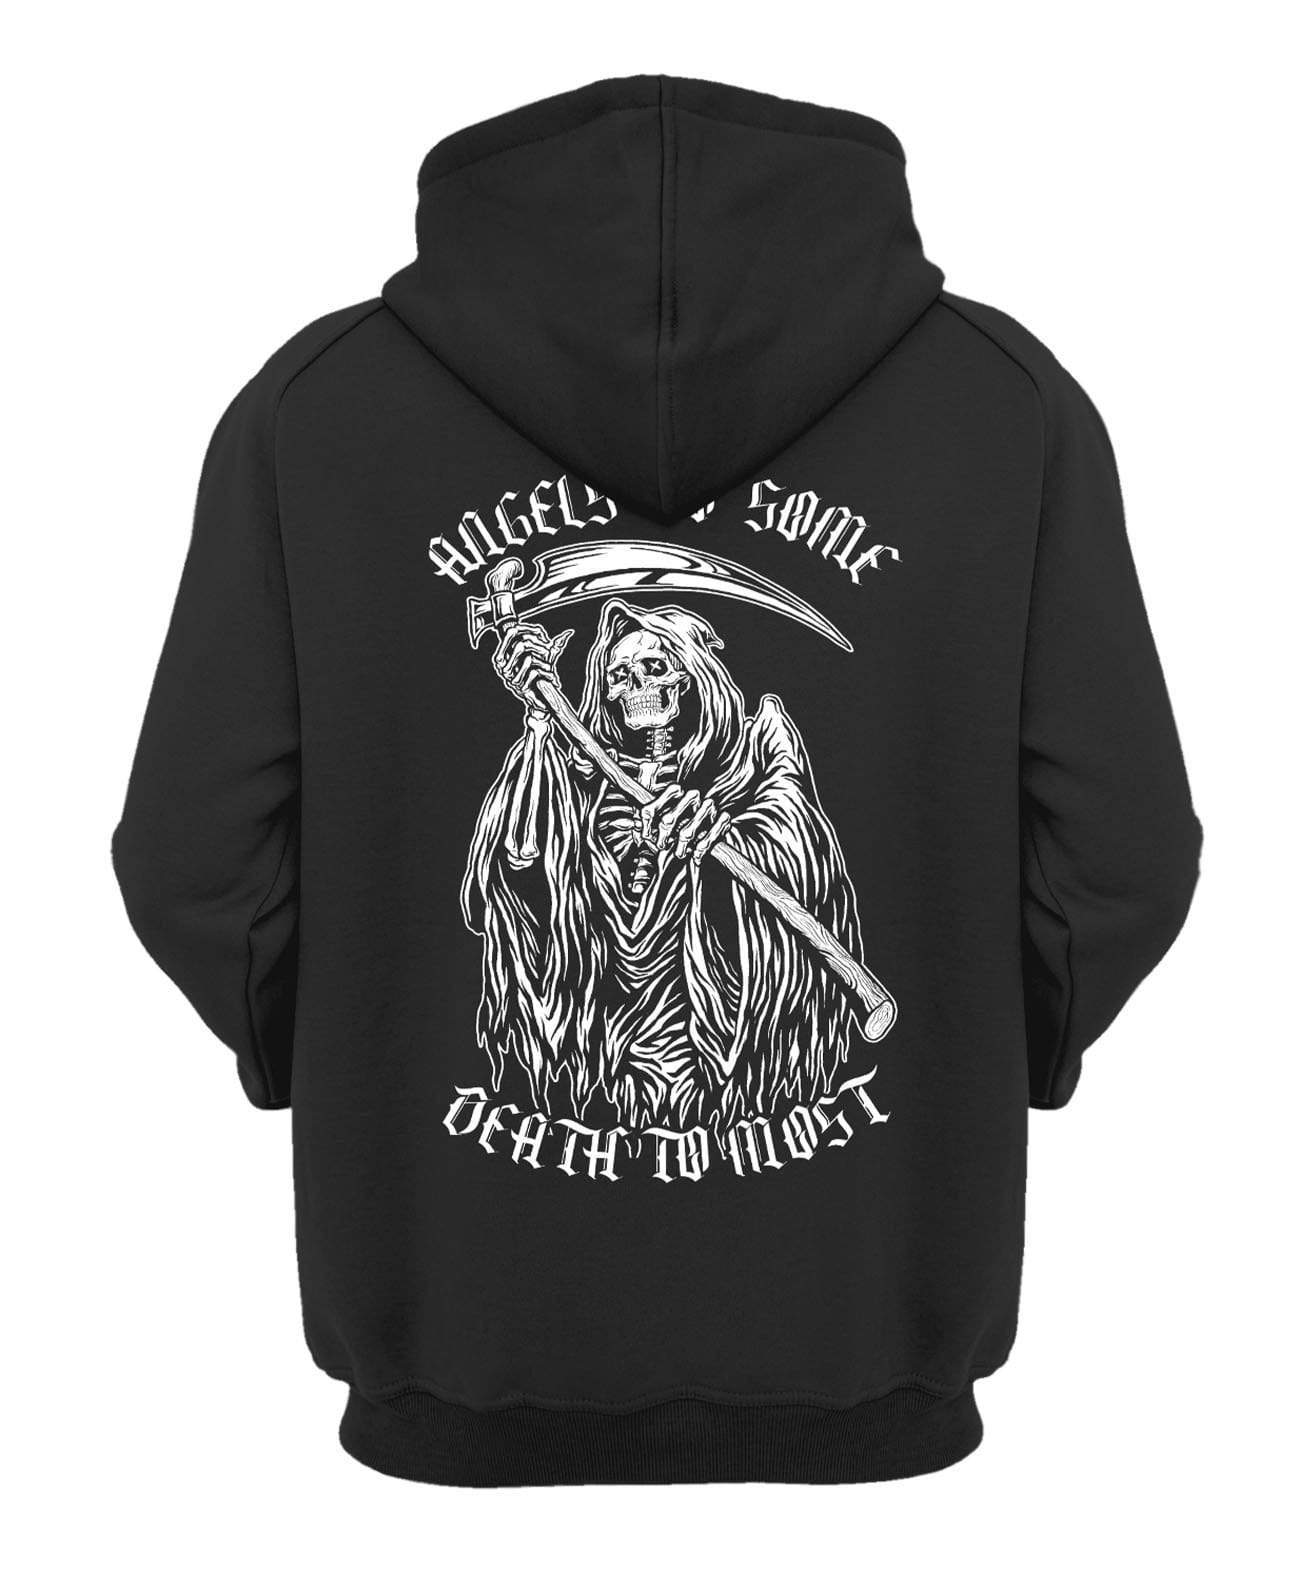 Angels to Some, Death to Most Hooded Sweatshirt XS / Black TuffWraps.com